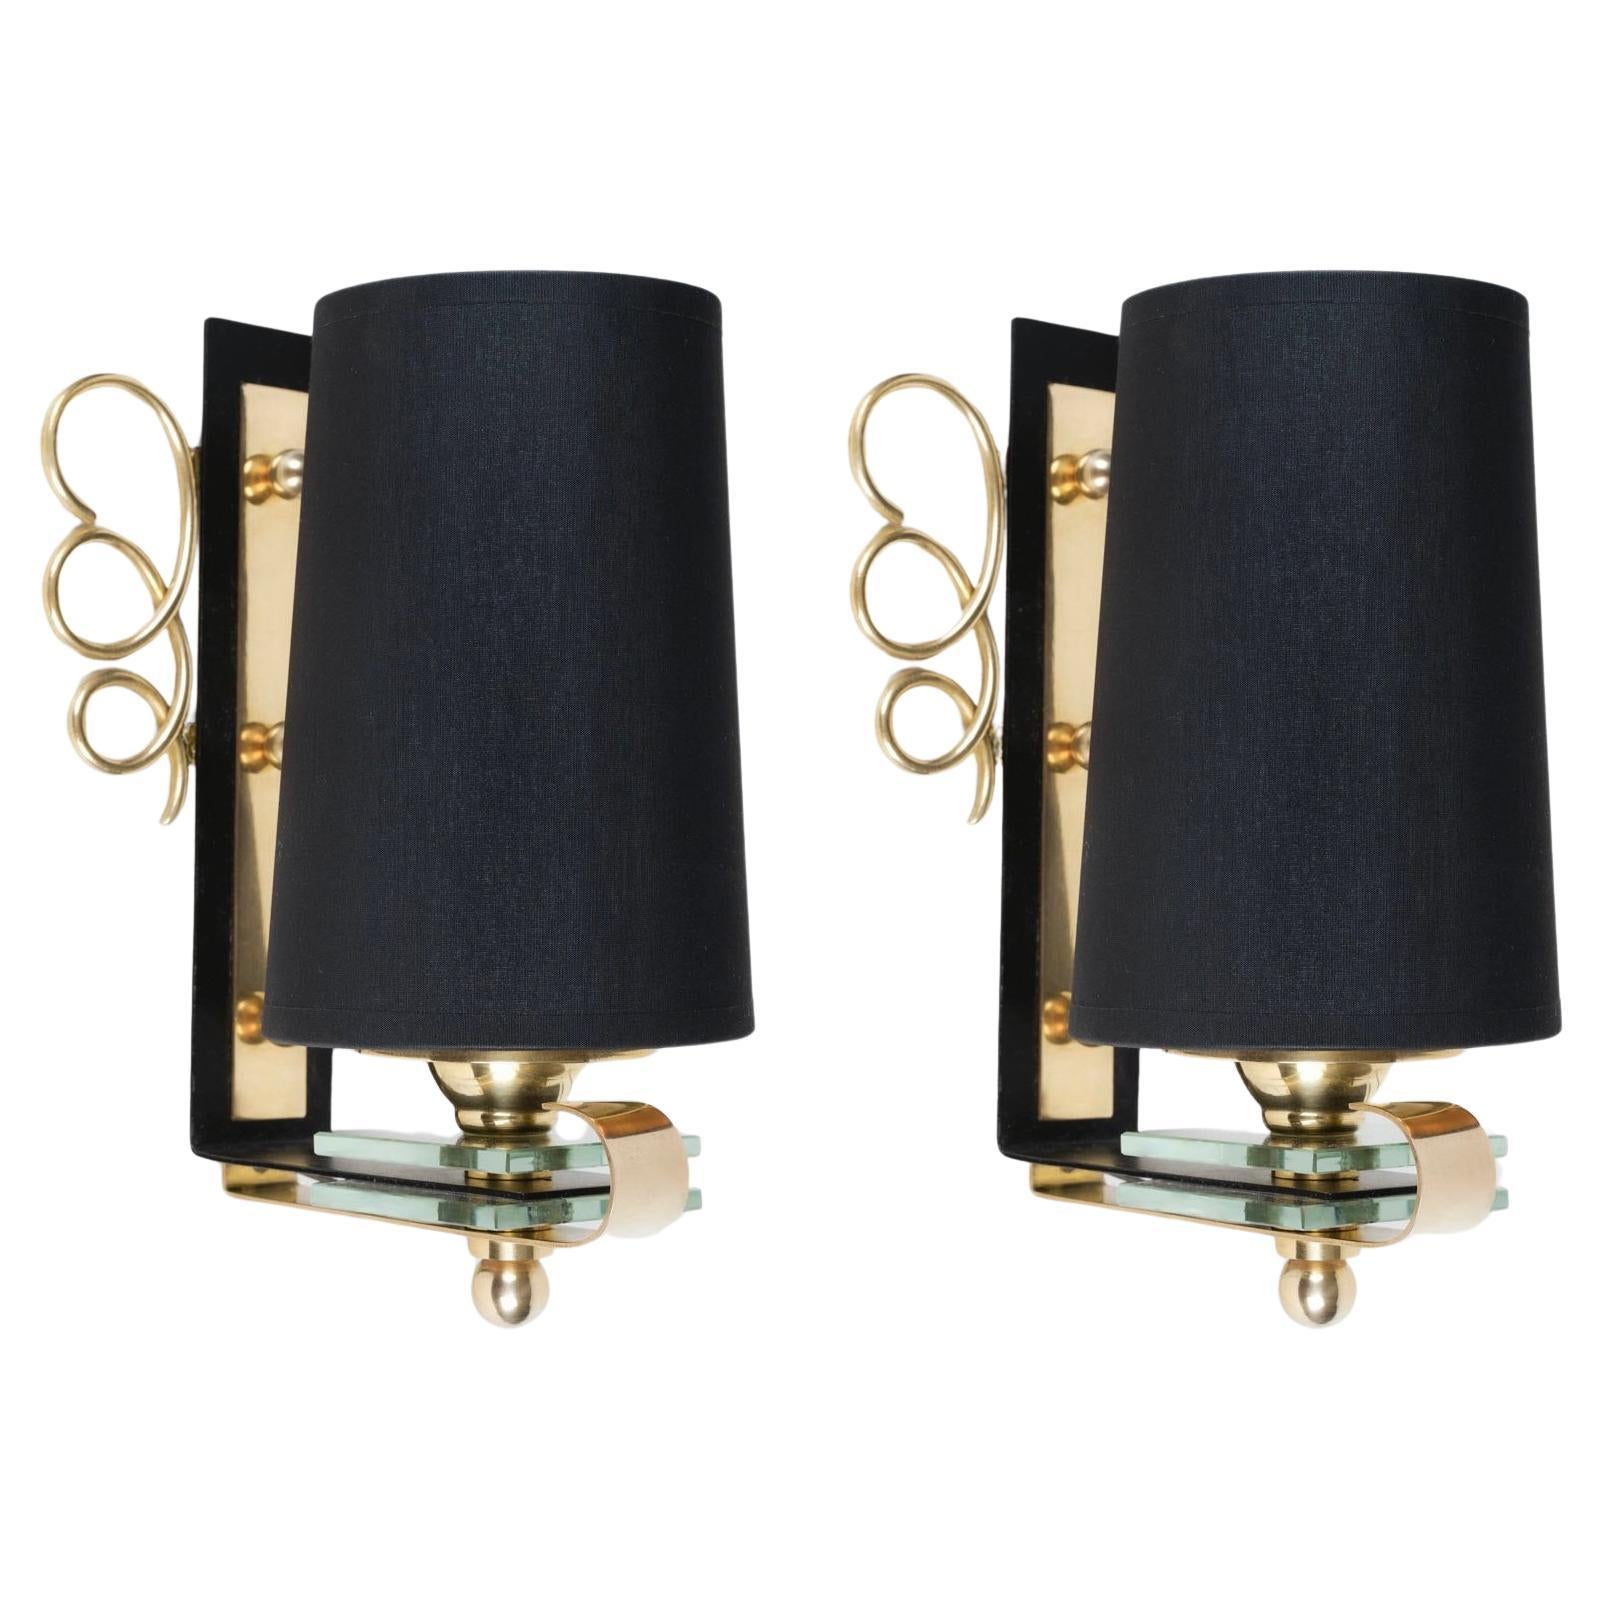 Atelier Petitot Wall Lights and Sconces